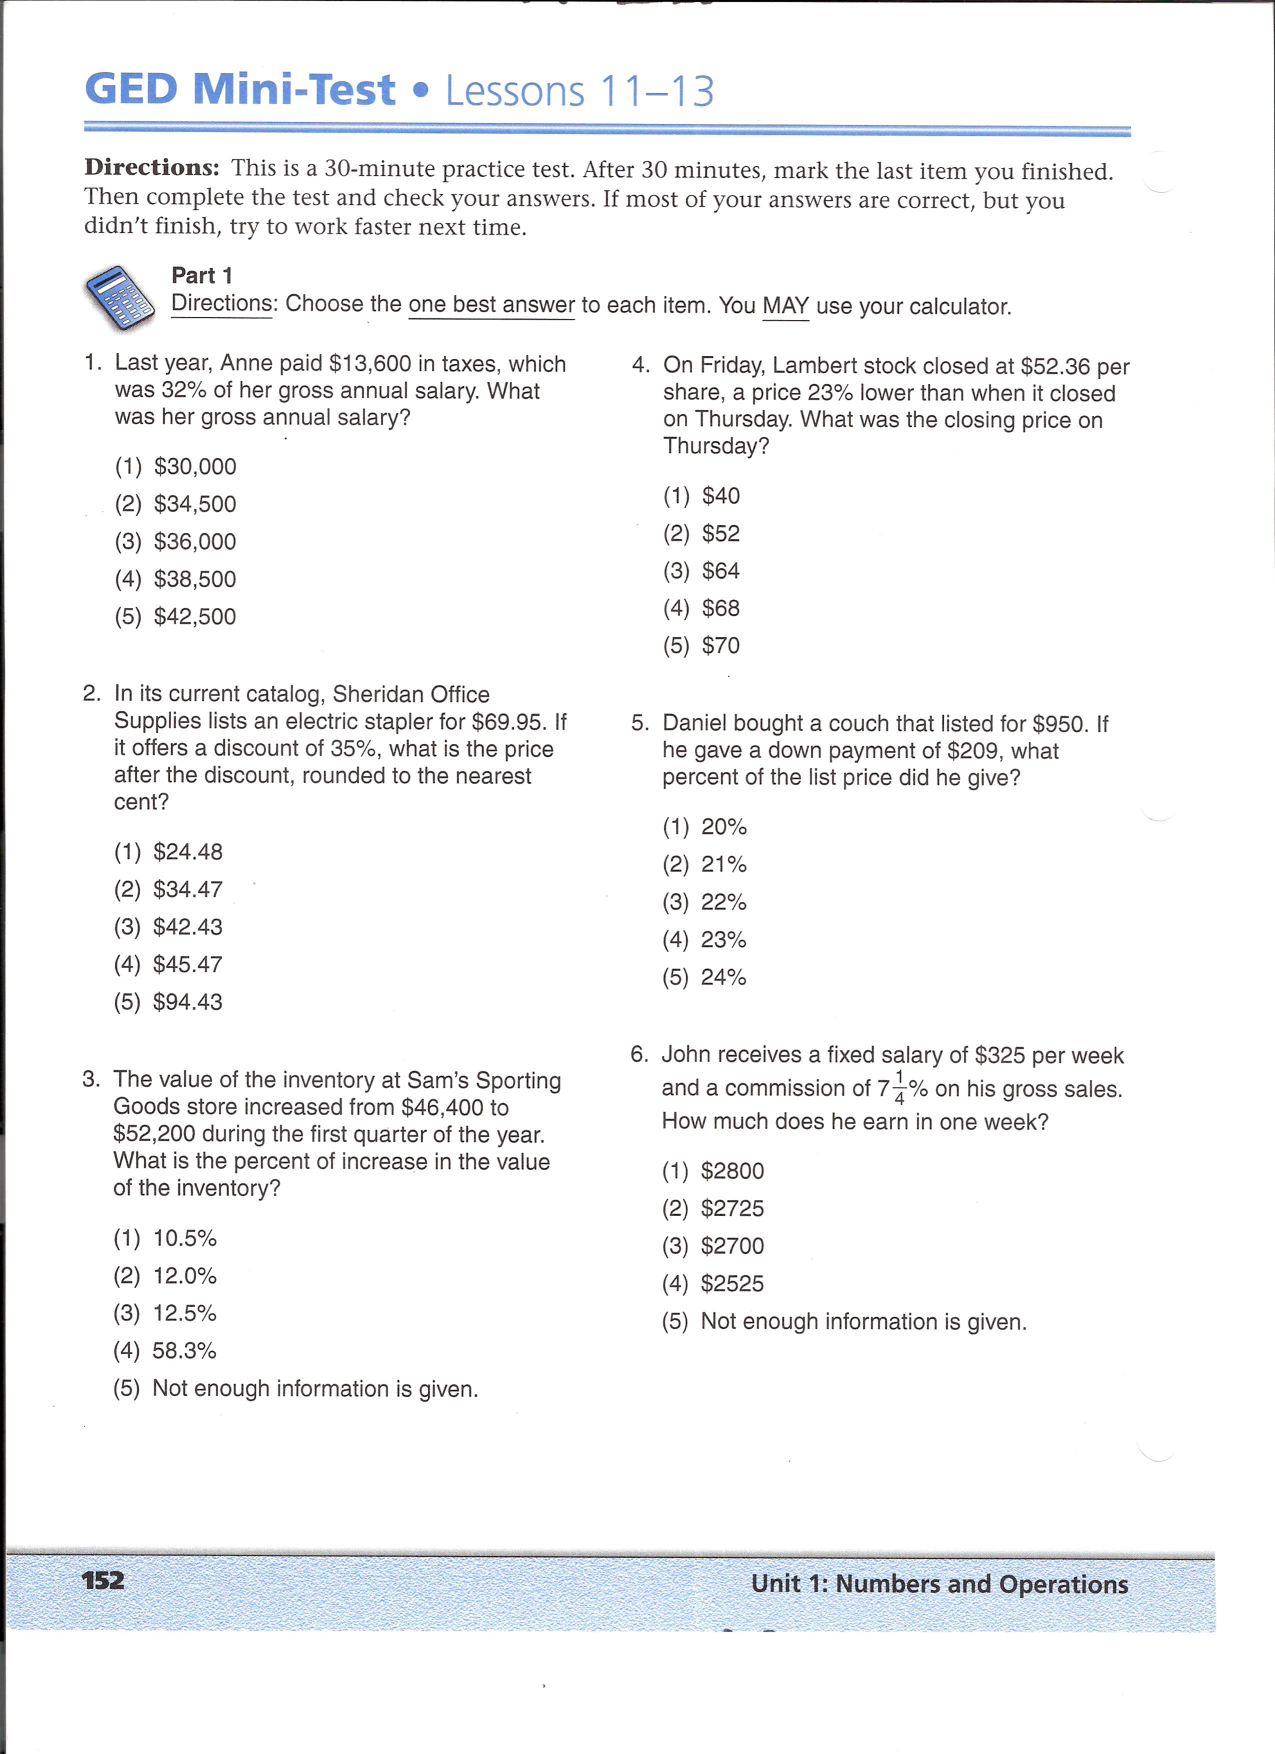 Free Ged Worksheets With Answers - Saferbrowser Image Search in Free Printable Ged Practice Test